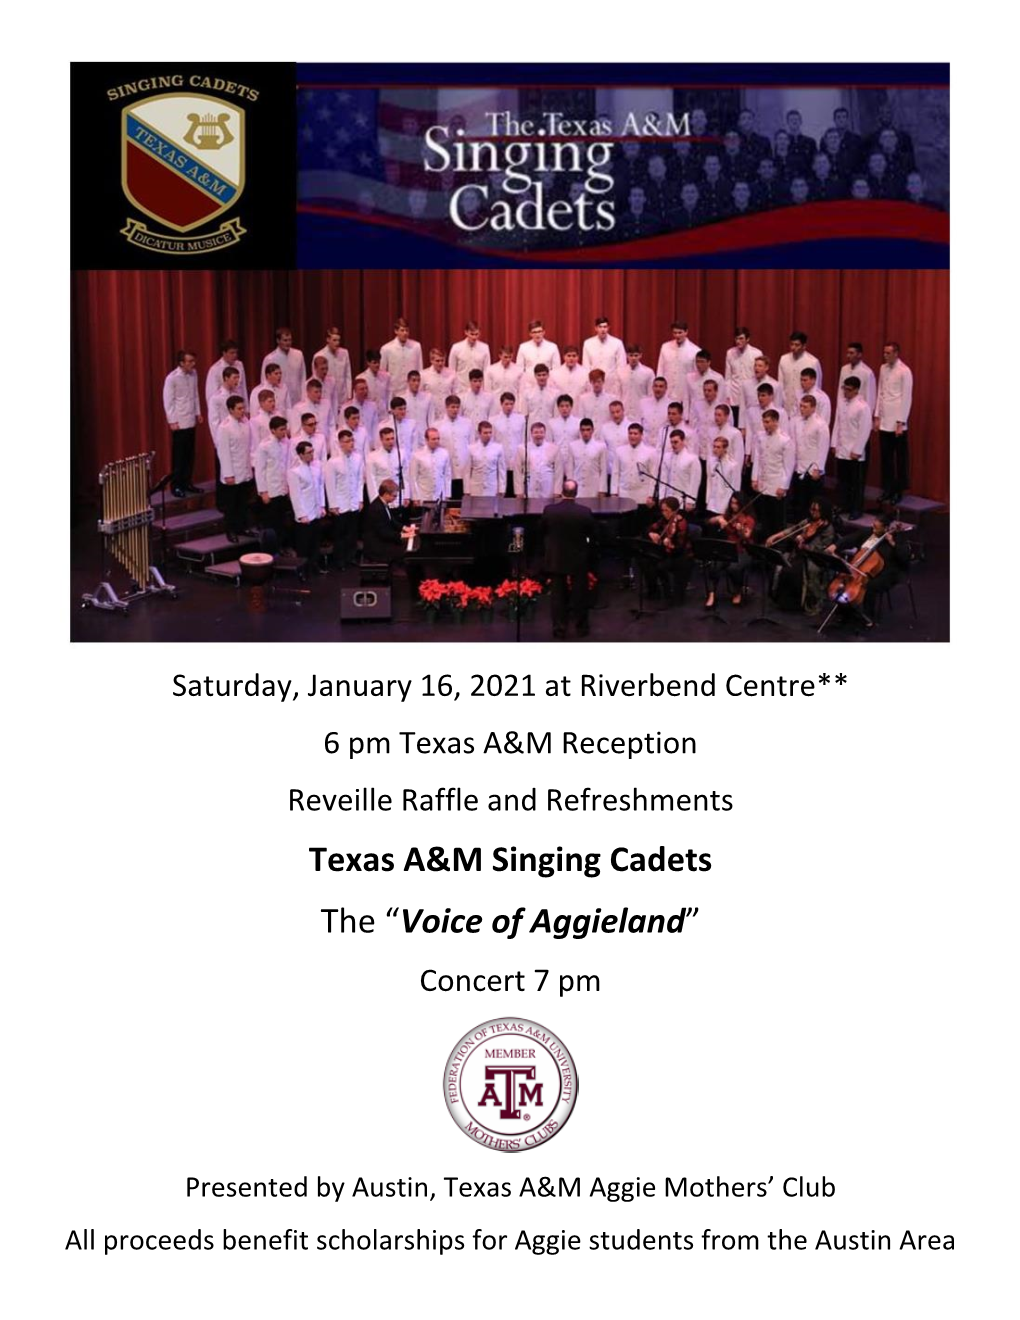 Texas A&M Singing Cadets the “Voice of Aggieland”